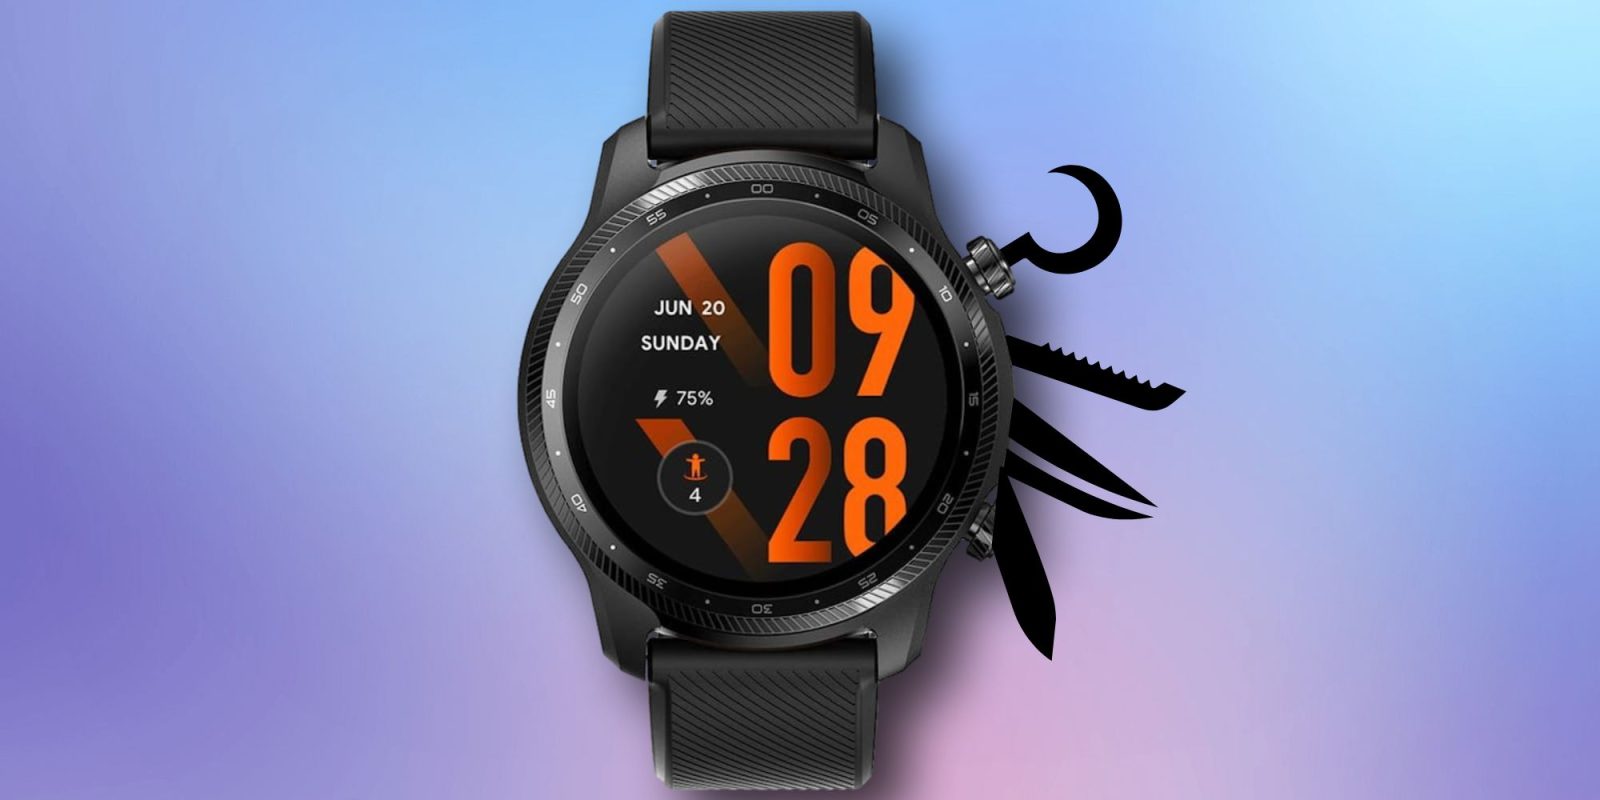 TicWatch Pro 3 Ultra is a smartwatch with many features ⋆ Jupiter & Dann